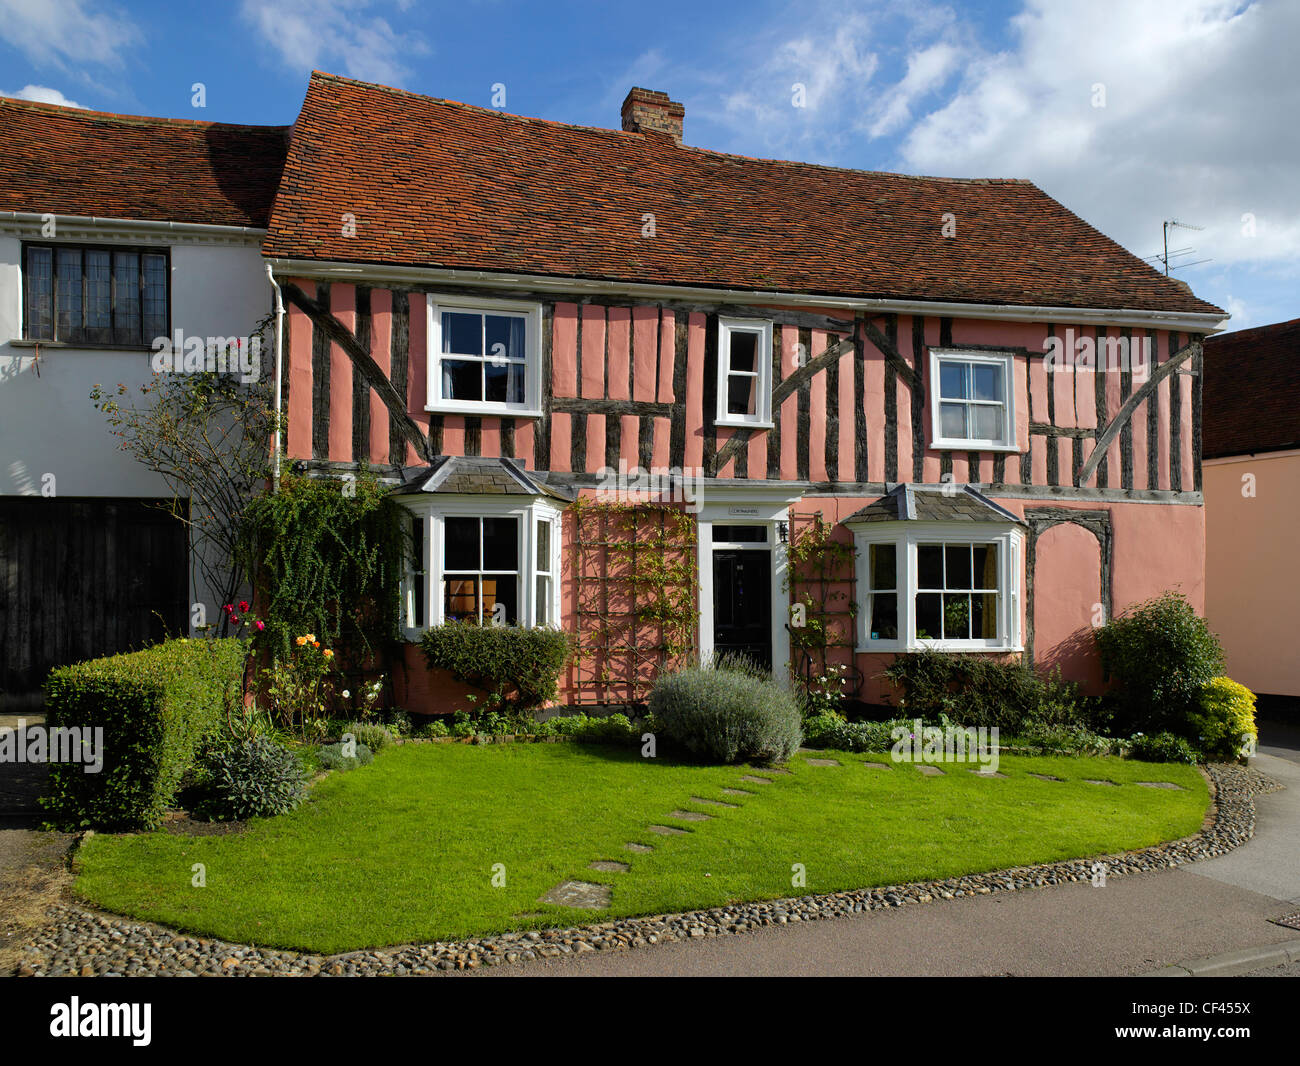 A traditional Suffolk timber framed house. Lavenham is often called the most complete medieval town in Britain, a tribute to its Stock Photo